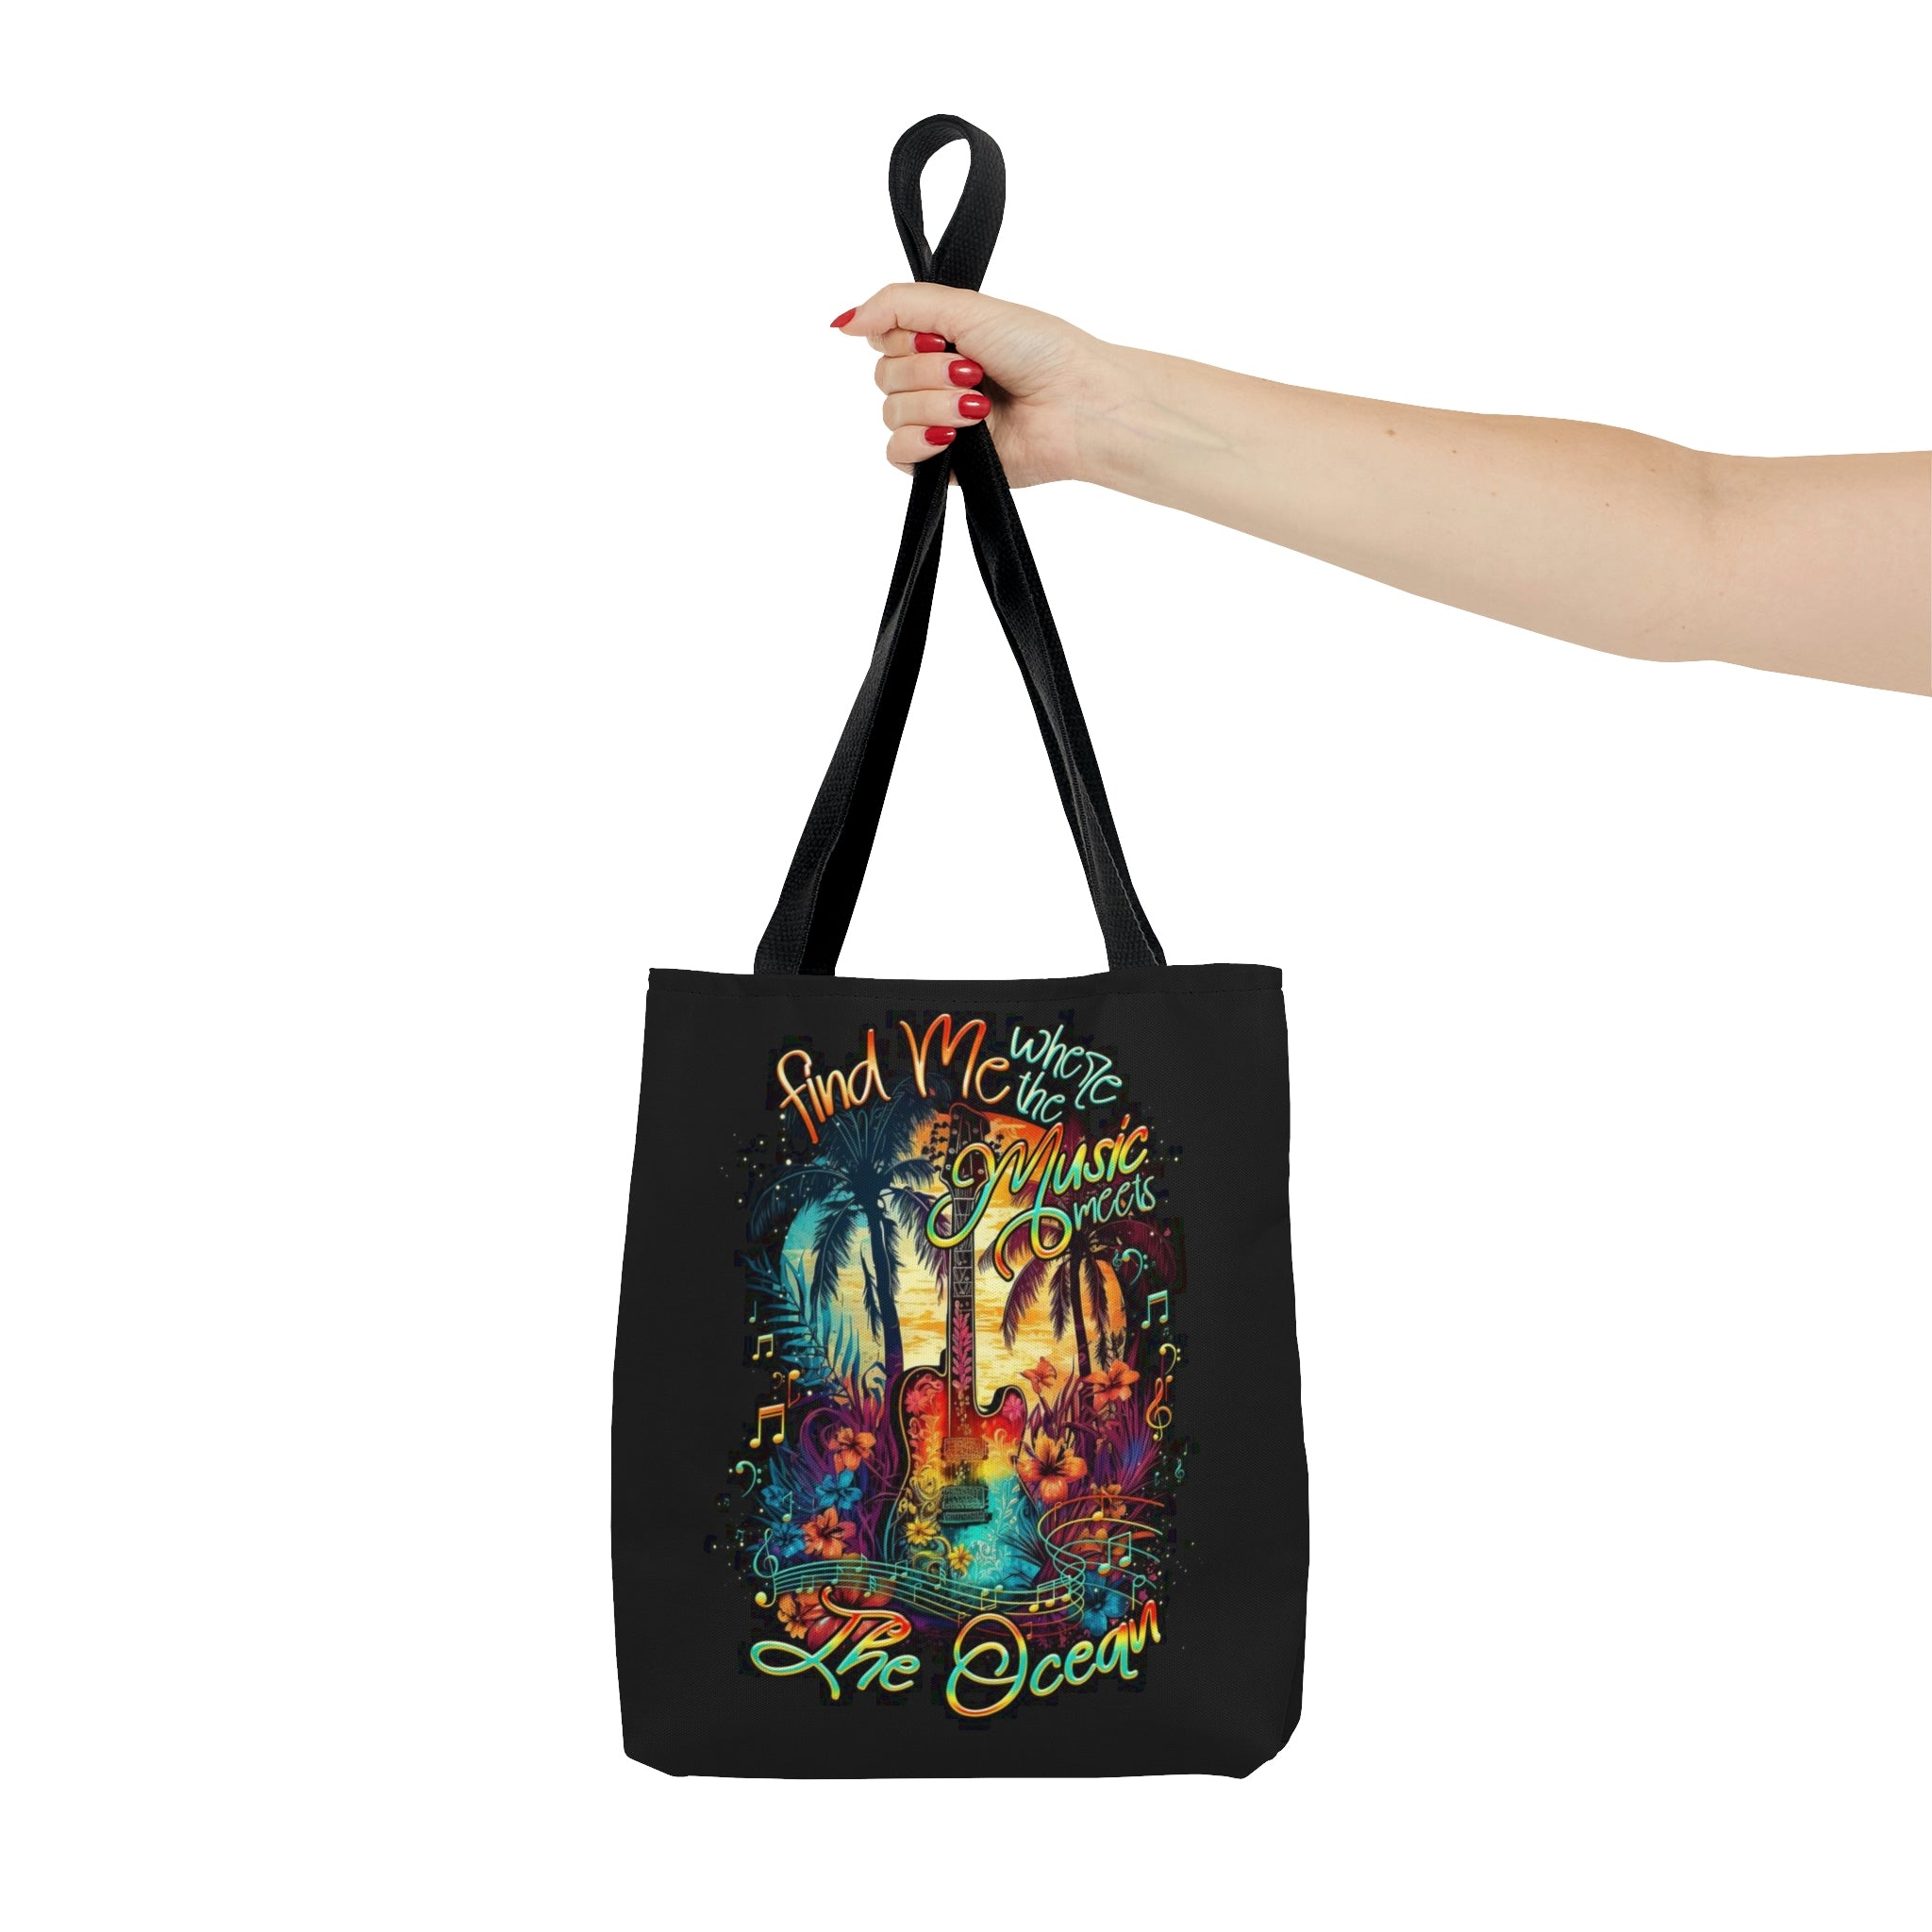 FIND ME WHERE THE MUSIC MEETS THE OCEAN GUITAR TOTE BAG  - TLNO1305232